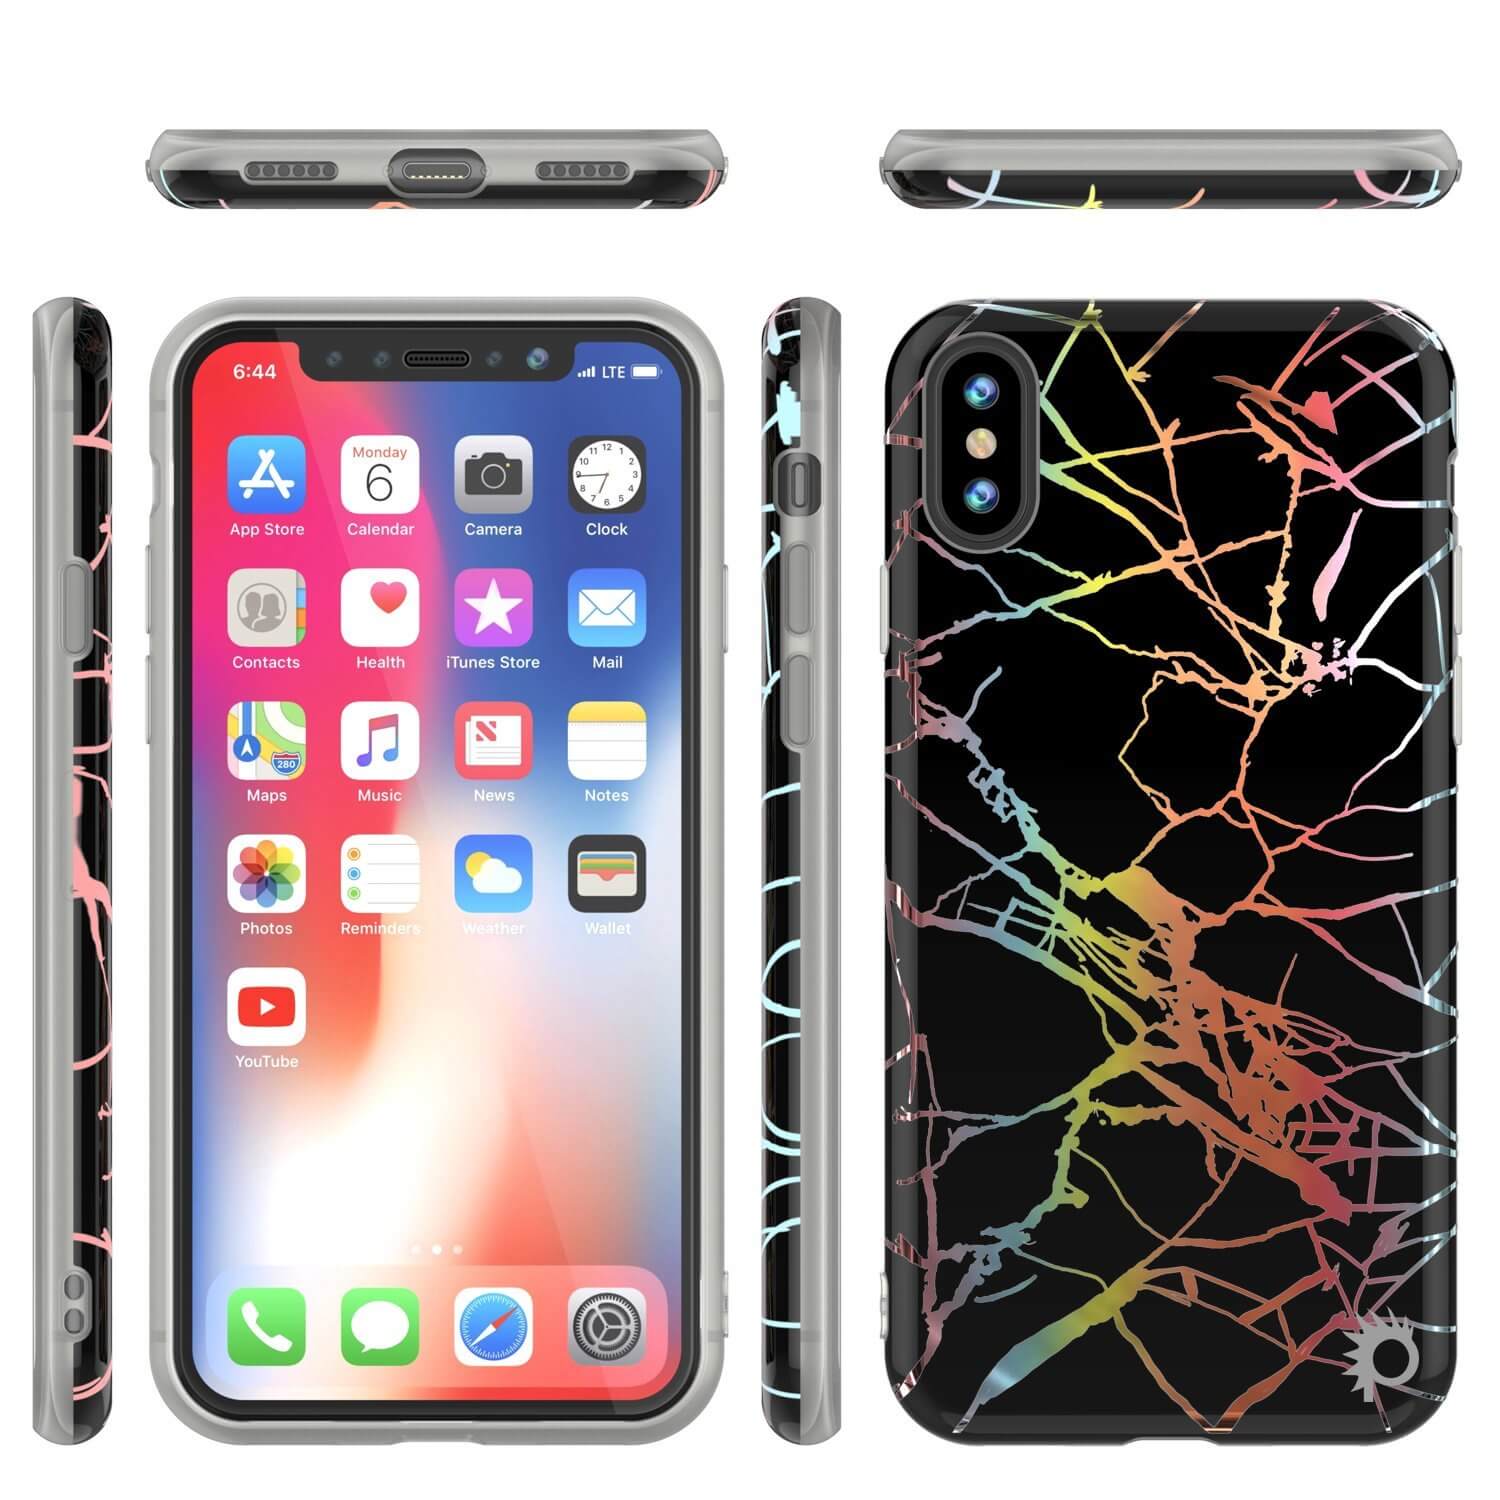 iPhone X Case, iPhone 10 Screen Protector, iPhone X Protective